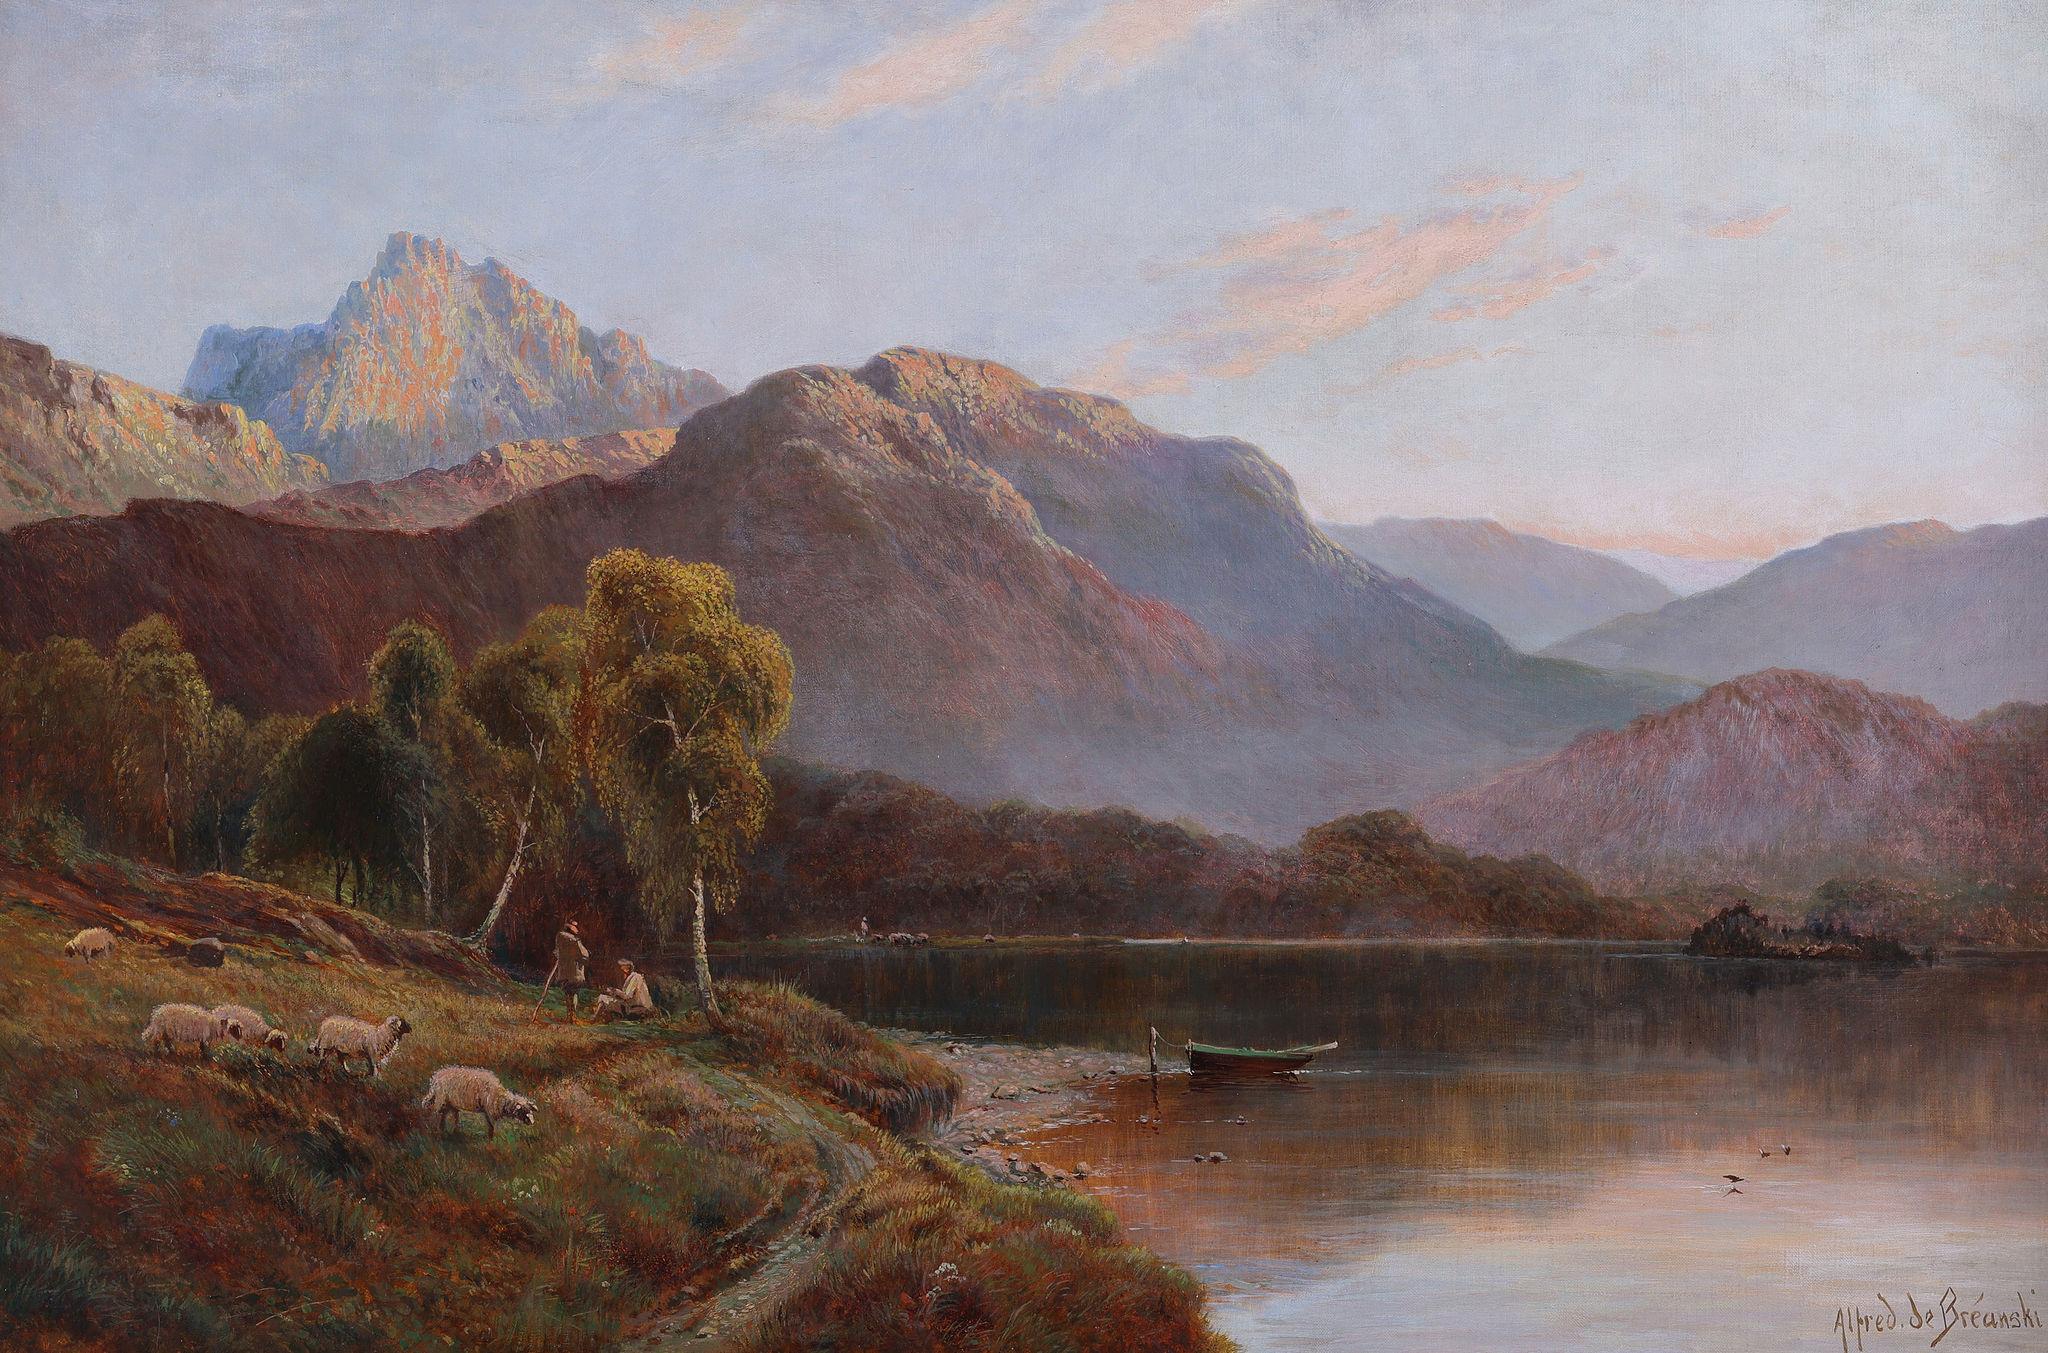 Ben-Venue and Ben-A'an - Painting by Alfred de Breanski Sr.